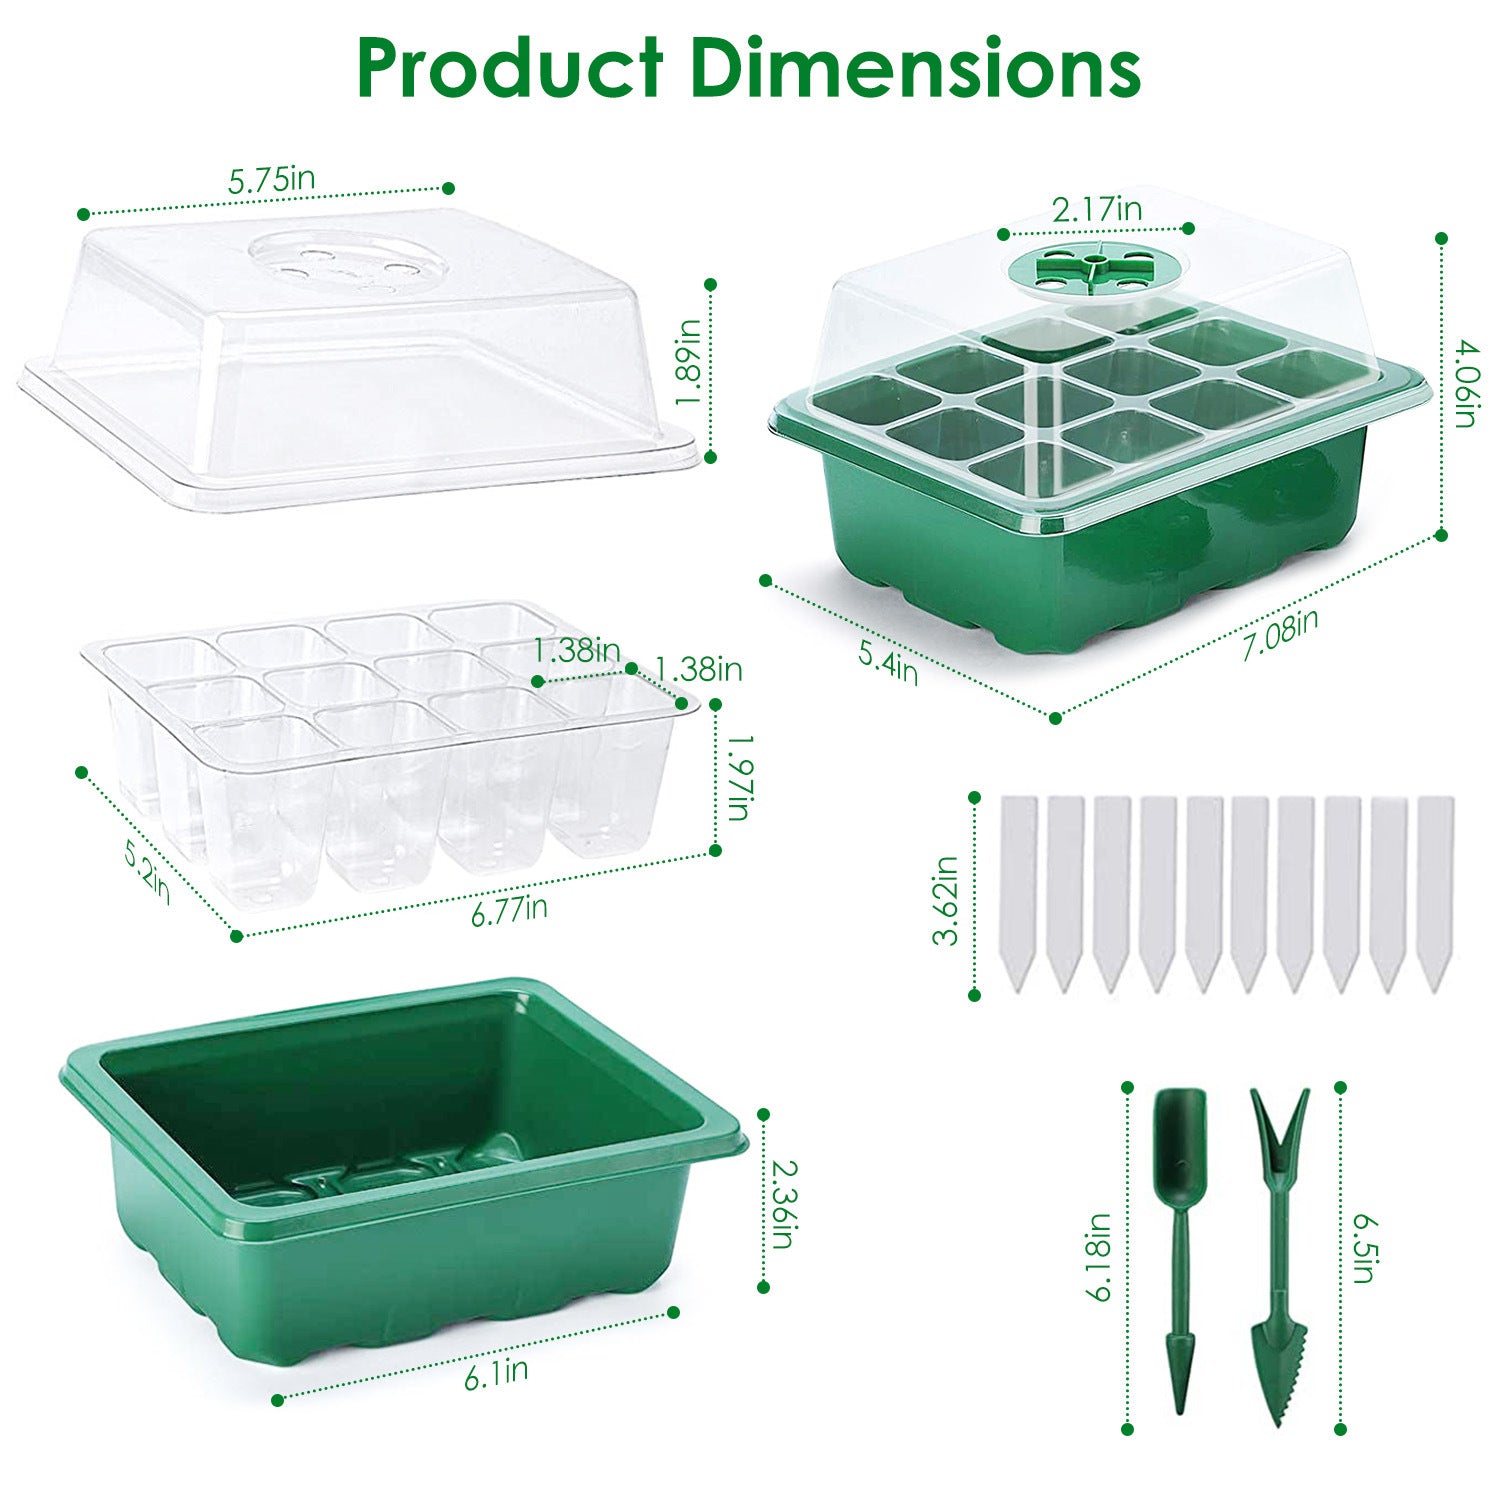 10 Pcs Seedling Tray, Seedling Tray with Dome